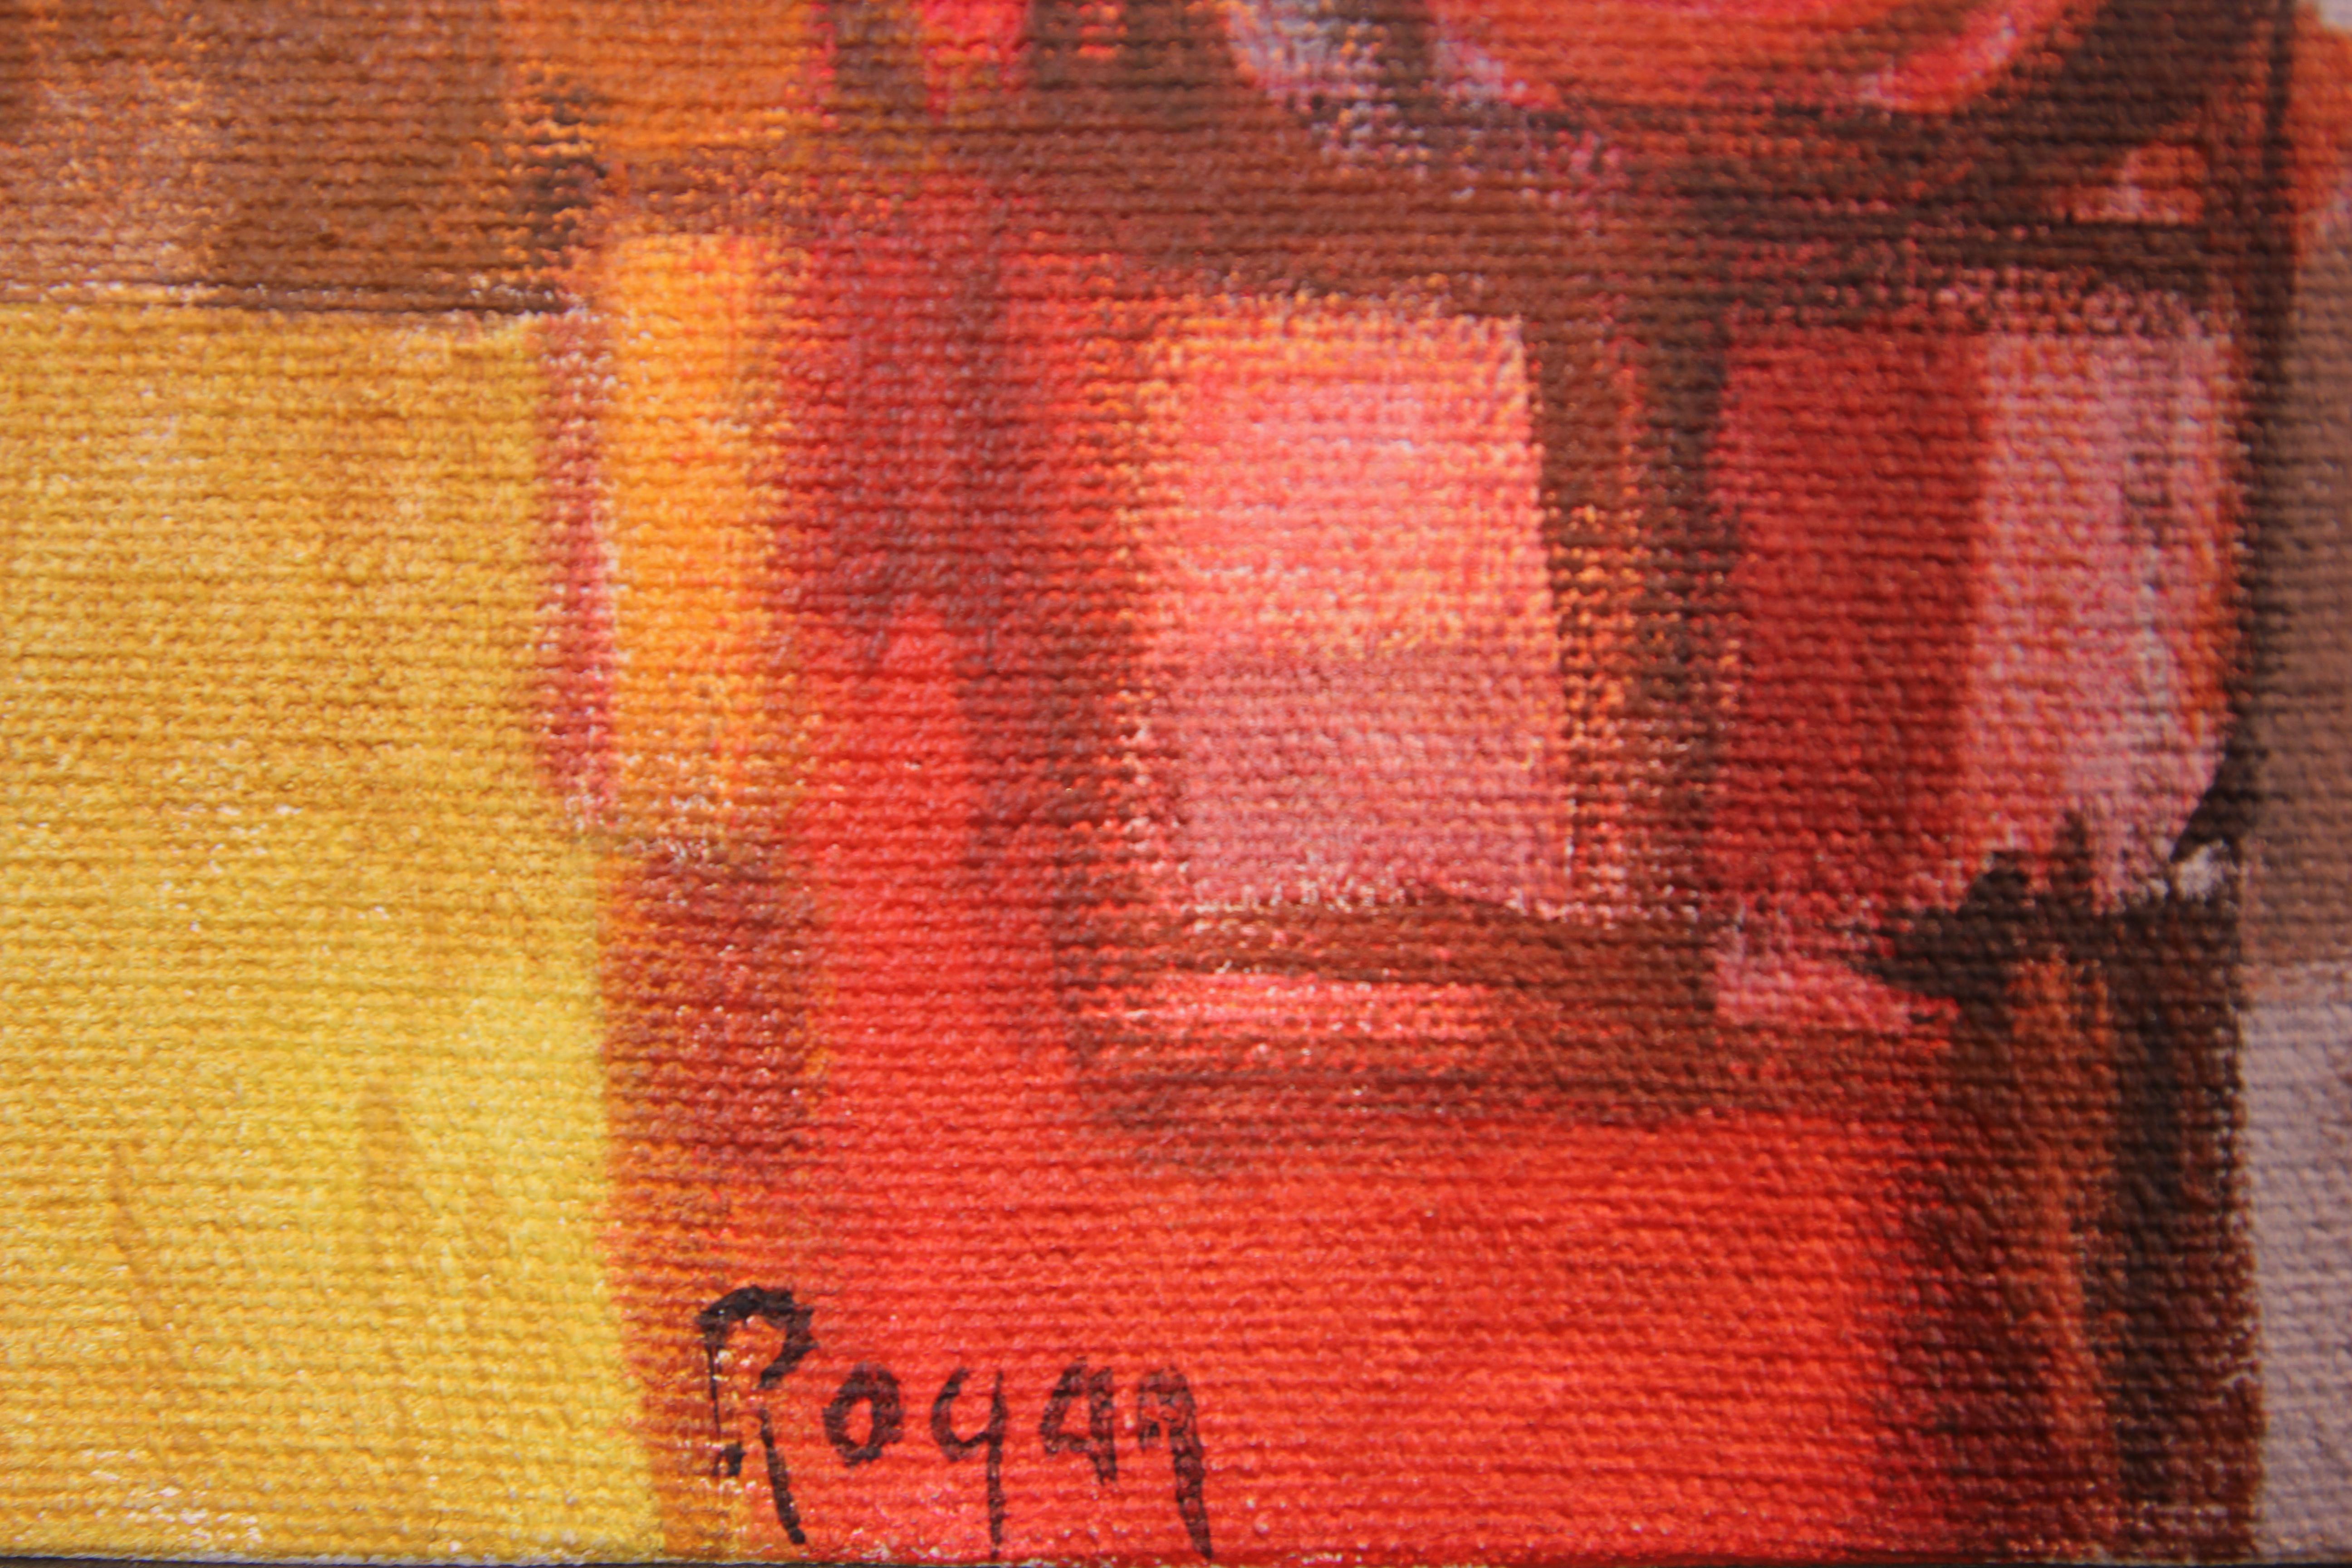 Red Abstract Cubist Landscape - Painting by Robert Rogan